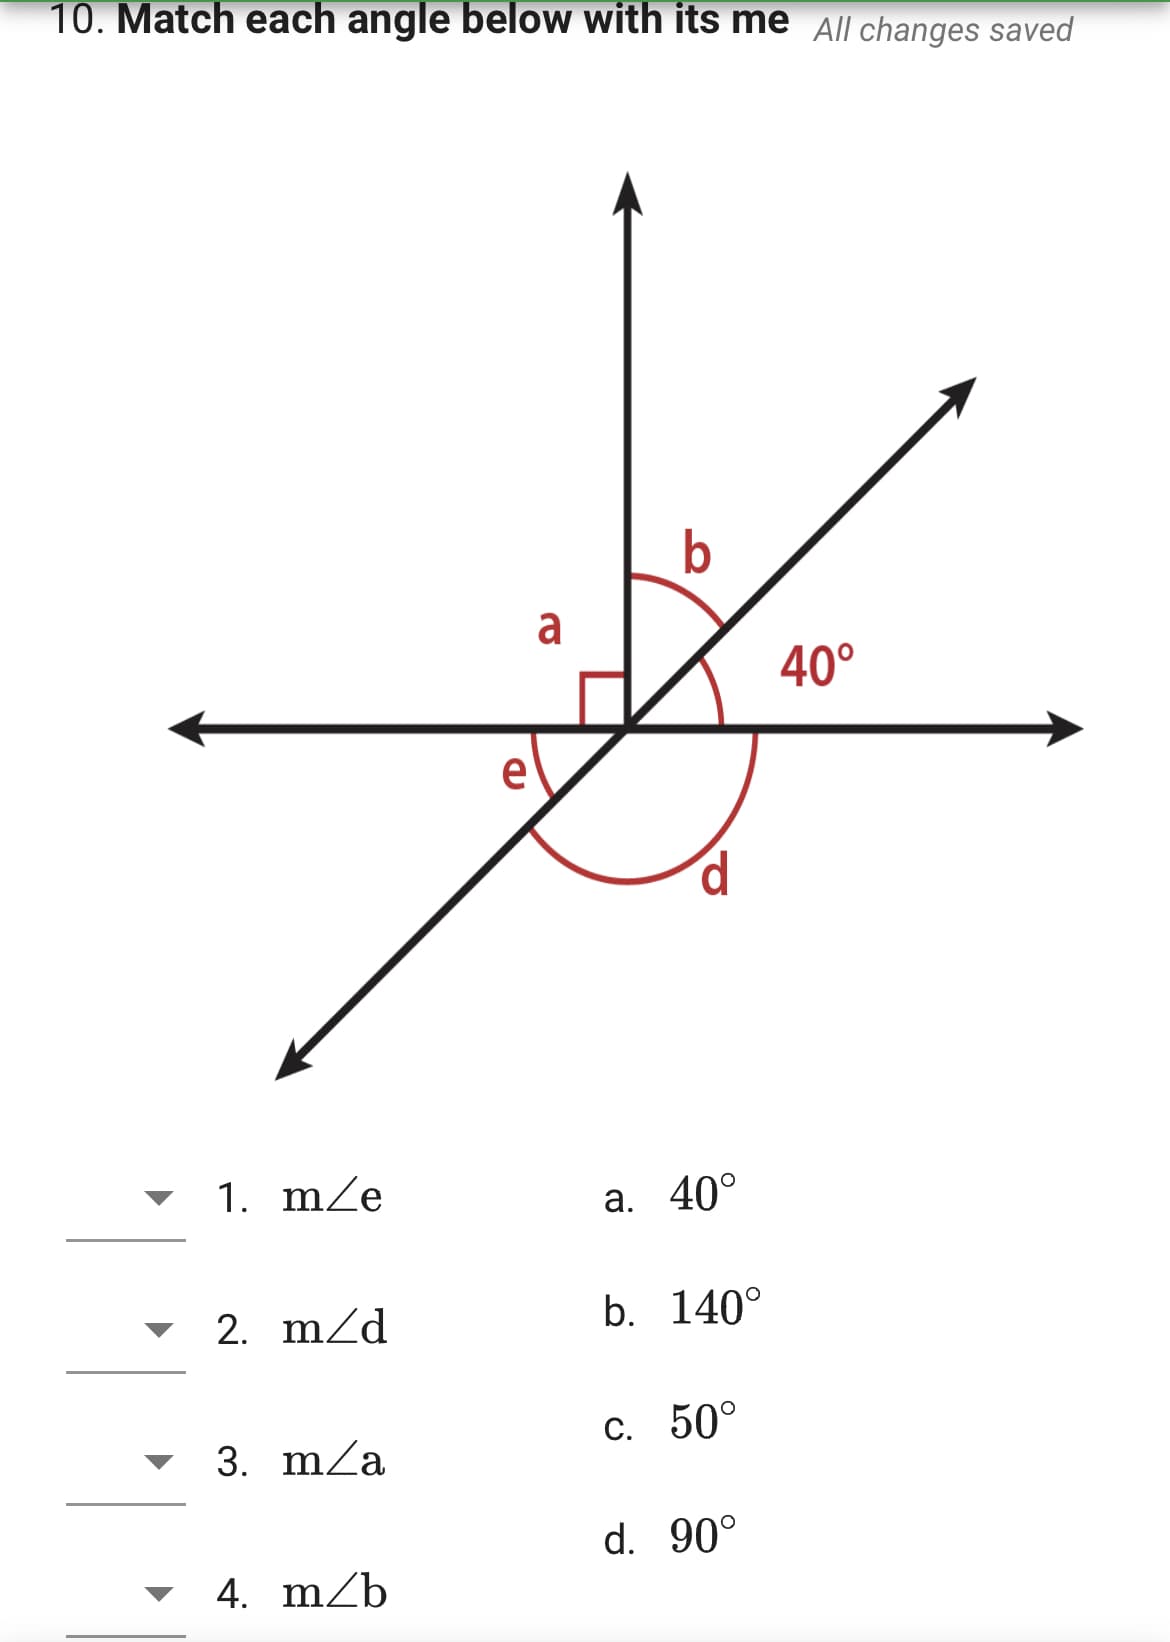 ## Matching Angles with Their Measures

### Instructions:
Match each angle below with its corresponding measure from the given options.

### Diagram Explanation

The diagram displays a set of intersecting lines creating several angles, labeled as \(a\), \(b\), \(d\), and \(e\). Notably:

- Angle \(b\) is given as 40°.
- Angle \(e\) appears to be adjacent to a right angle (90°), forming a straight line with angle \(a\).
- Angle \(d\) is adjacent to \(b\) creating a linear pair.
- Angle \(a\) forms a right angle (90°).

### Matching Options

1. \( \angle e \) \
   Match with: \
   a. 40° \
   b. 140° \
   c. 50° \
   d. 90°

2. \( \angle d \) \
   Match with: \
   a. 40° \
   b. 140° \
   c. 50° \
   d. 90°

3. \( \angle a \) \
   Match with: \
   a. 40° \
   b. 140° \
   c. 50° \
   d. 90°

4. \( \angle b \) \
   Match with: \
   a. 40° \
   b. 140° \
   c. 50° \
   d. 90°

### Explanation:

- Angle \(b\) is directly given as 40°.
- Considering that \(a\) is a right angle, its measure is 90°.
- Since \(b\) and \(d\) form a linear pair, and \(b\) is 40°, angle \(d\) would be 140° (180° - 40°).
- Angle \(e\) complements angle \(a\) to form a straight line, so it measures 50° (180° - 90° - 40°).

### Solution:

1. \( \angle e \) -> c. 50°
2. \( \angle d \) -> b. 140°
3. \( \angle a \) -> d. 90°
4. \( \angle b \) -> a. 40°

### Summary:

This exercise tests your understanding of complementary and supplementary angles as well as the properties of intersecting lines